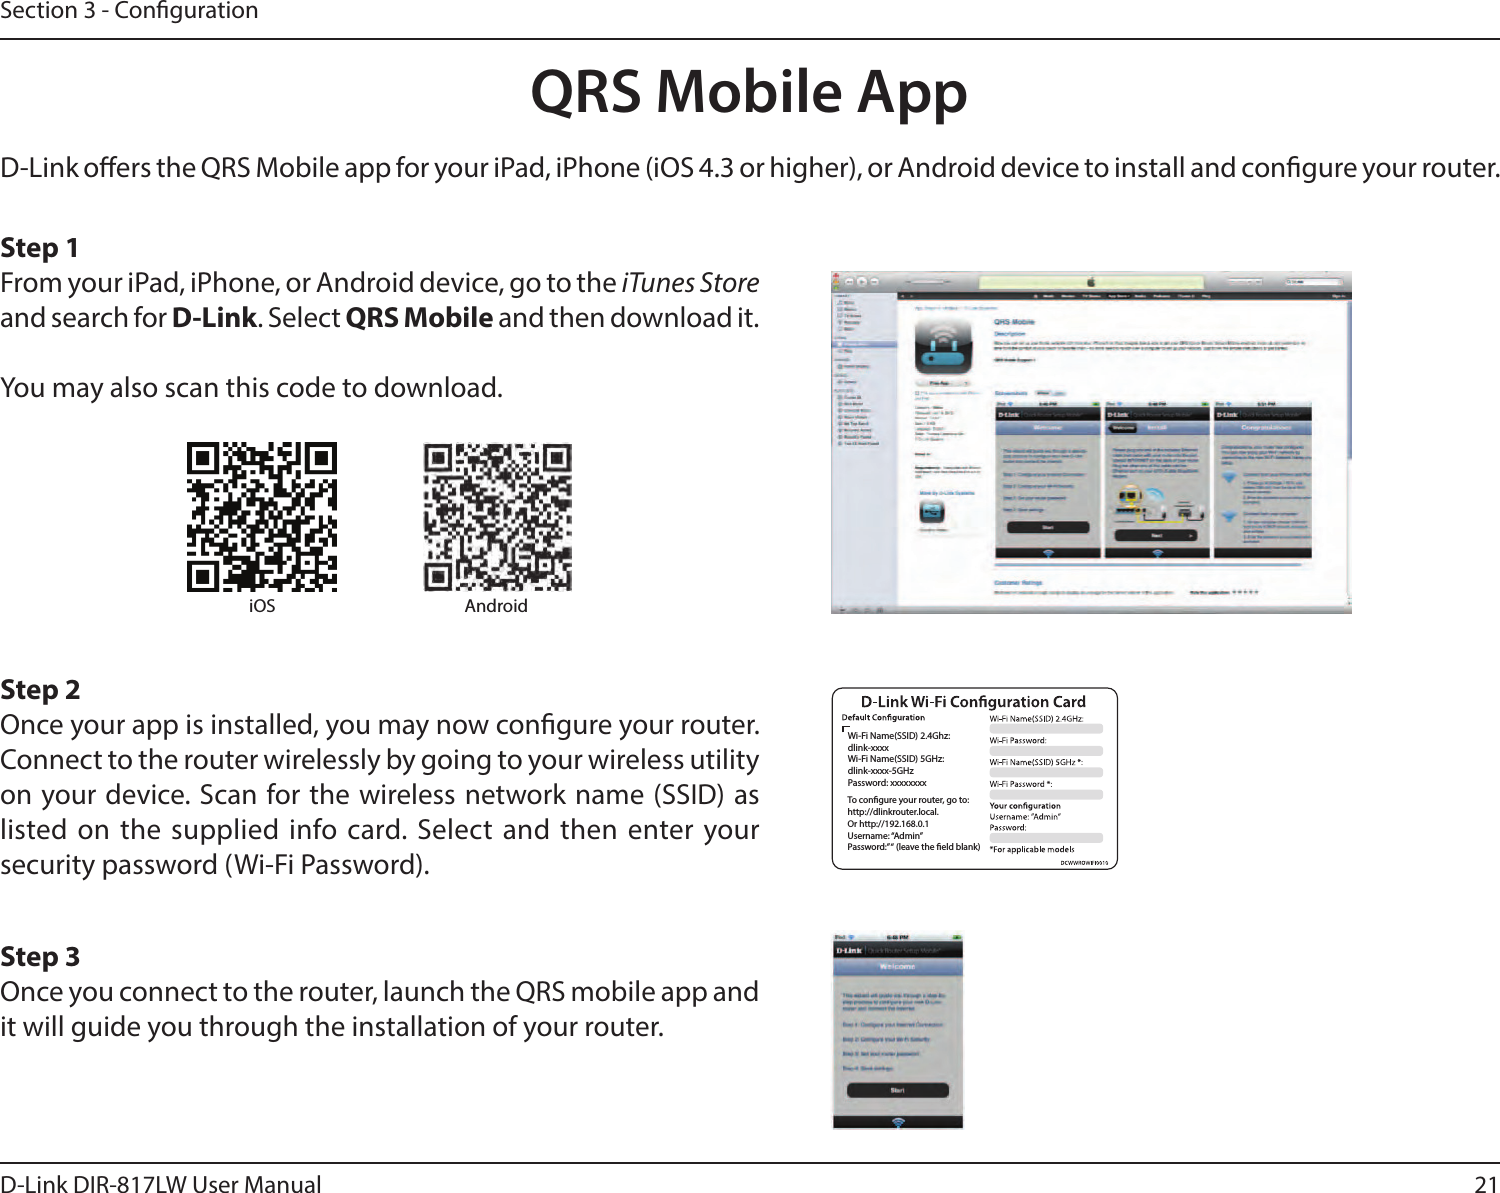 21D-Link DIR-817LW User ManualSection 3 - CongurationQRS Mobile AppD-Link oers the QRS Mobile app for your iPad, iPhone (iOS 4.3 or higher), or Android device to install and congure your router. Step 1From your iPad, iPhone, or Android device, go to the iTunes Store and search for D-Link. Select QRS Mobile and then download it.You may also scan this code to download.Step 2Once your app is installed, you may now congure your router. Connect to the router wirelessly by going to your wireless utility on your device. Scan for the wireless network name (SSID) as listed on the supplied  info card. Select and then enter your security password (Wi-Fi Password).Step 3Once you connect to the router, launch the QRS mobile app and it will guide you through the installation of your router.iOS AndroidWi-Fi Name(SSID) 2.4Ghz:dlink-xxxxWi-Fi Name(SSID) 5GHz:dlink-xxxx-5GHzPassword: xxxxxxxxTo congure your router, go to:http://dlinkrouter.local.Or http://192.168.0.1Username: “Admin”Password:” “ (leave the eld blank)